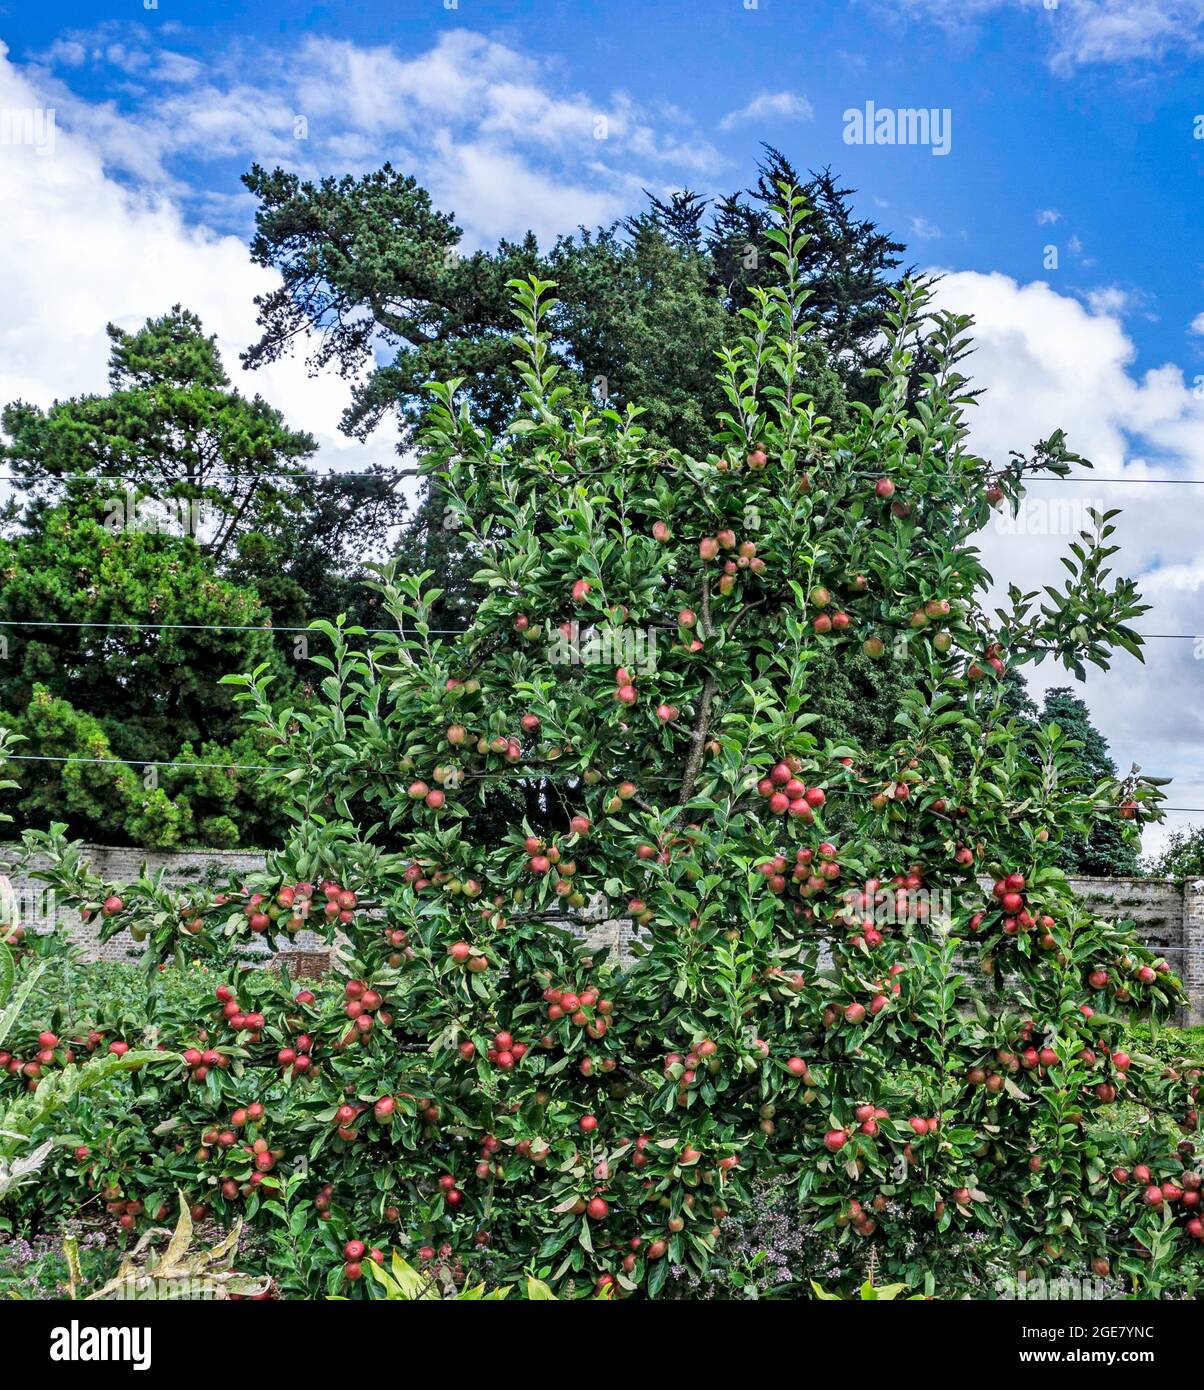 an espalier trained apple tree, with ripe red apples  trained to spread along a galvanised wire system. Stock Photo